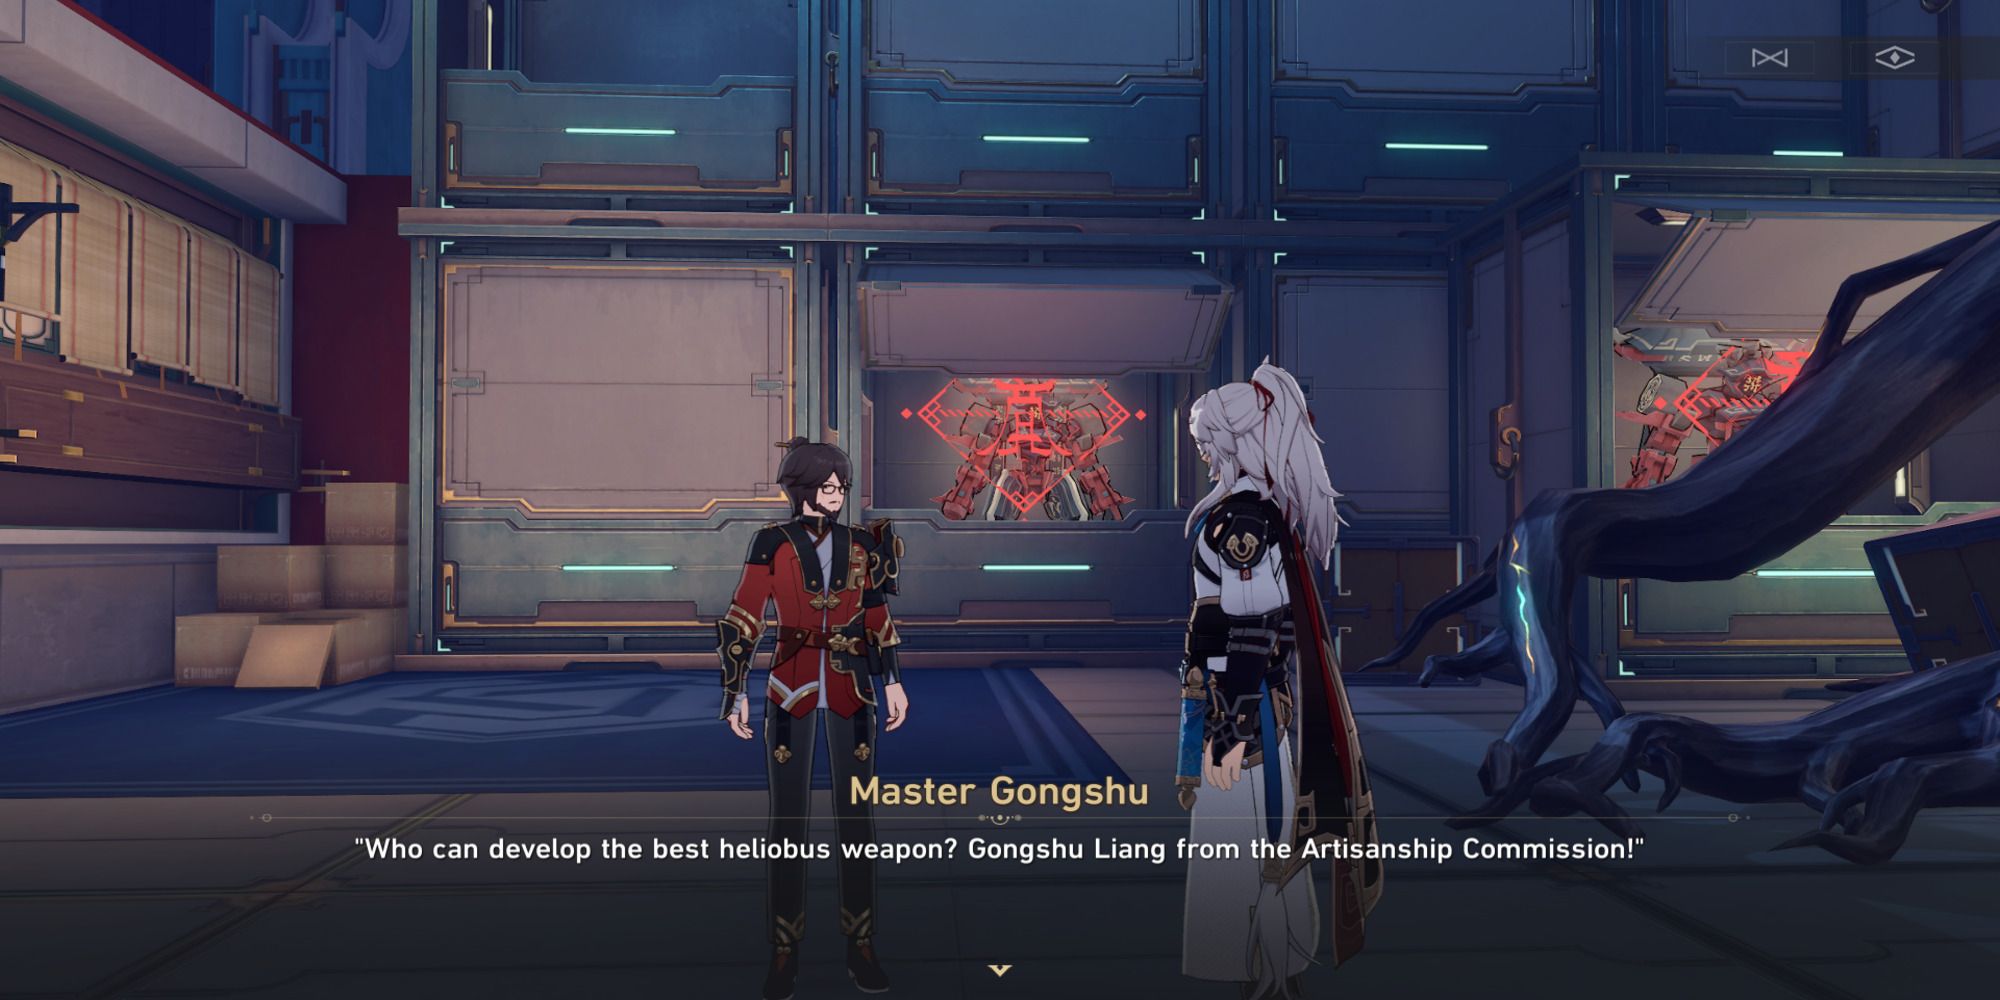 Master Gonshu from Honkai: Star Rail in the Artisanship Commission with Jing Yuan